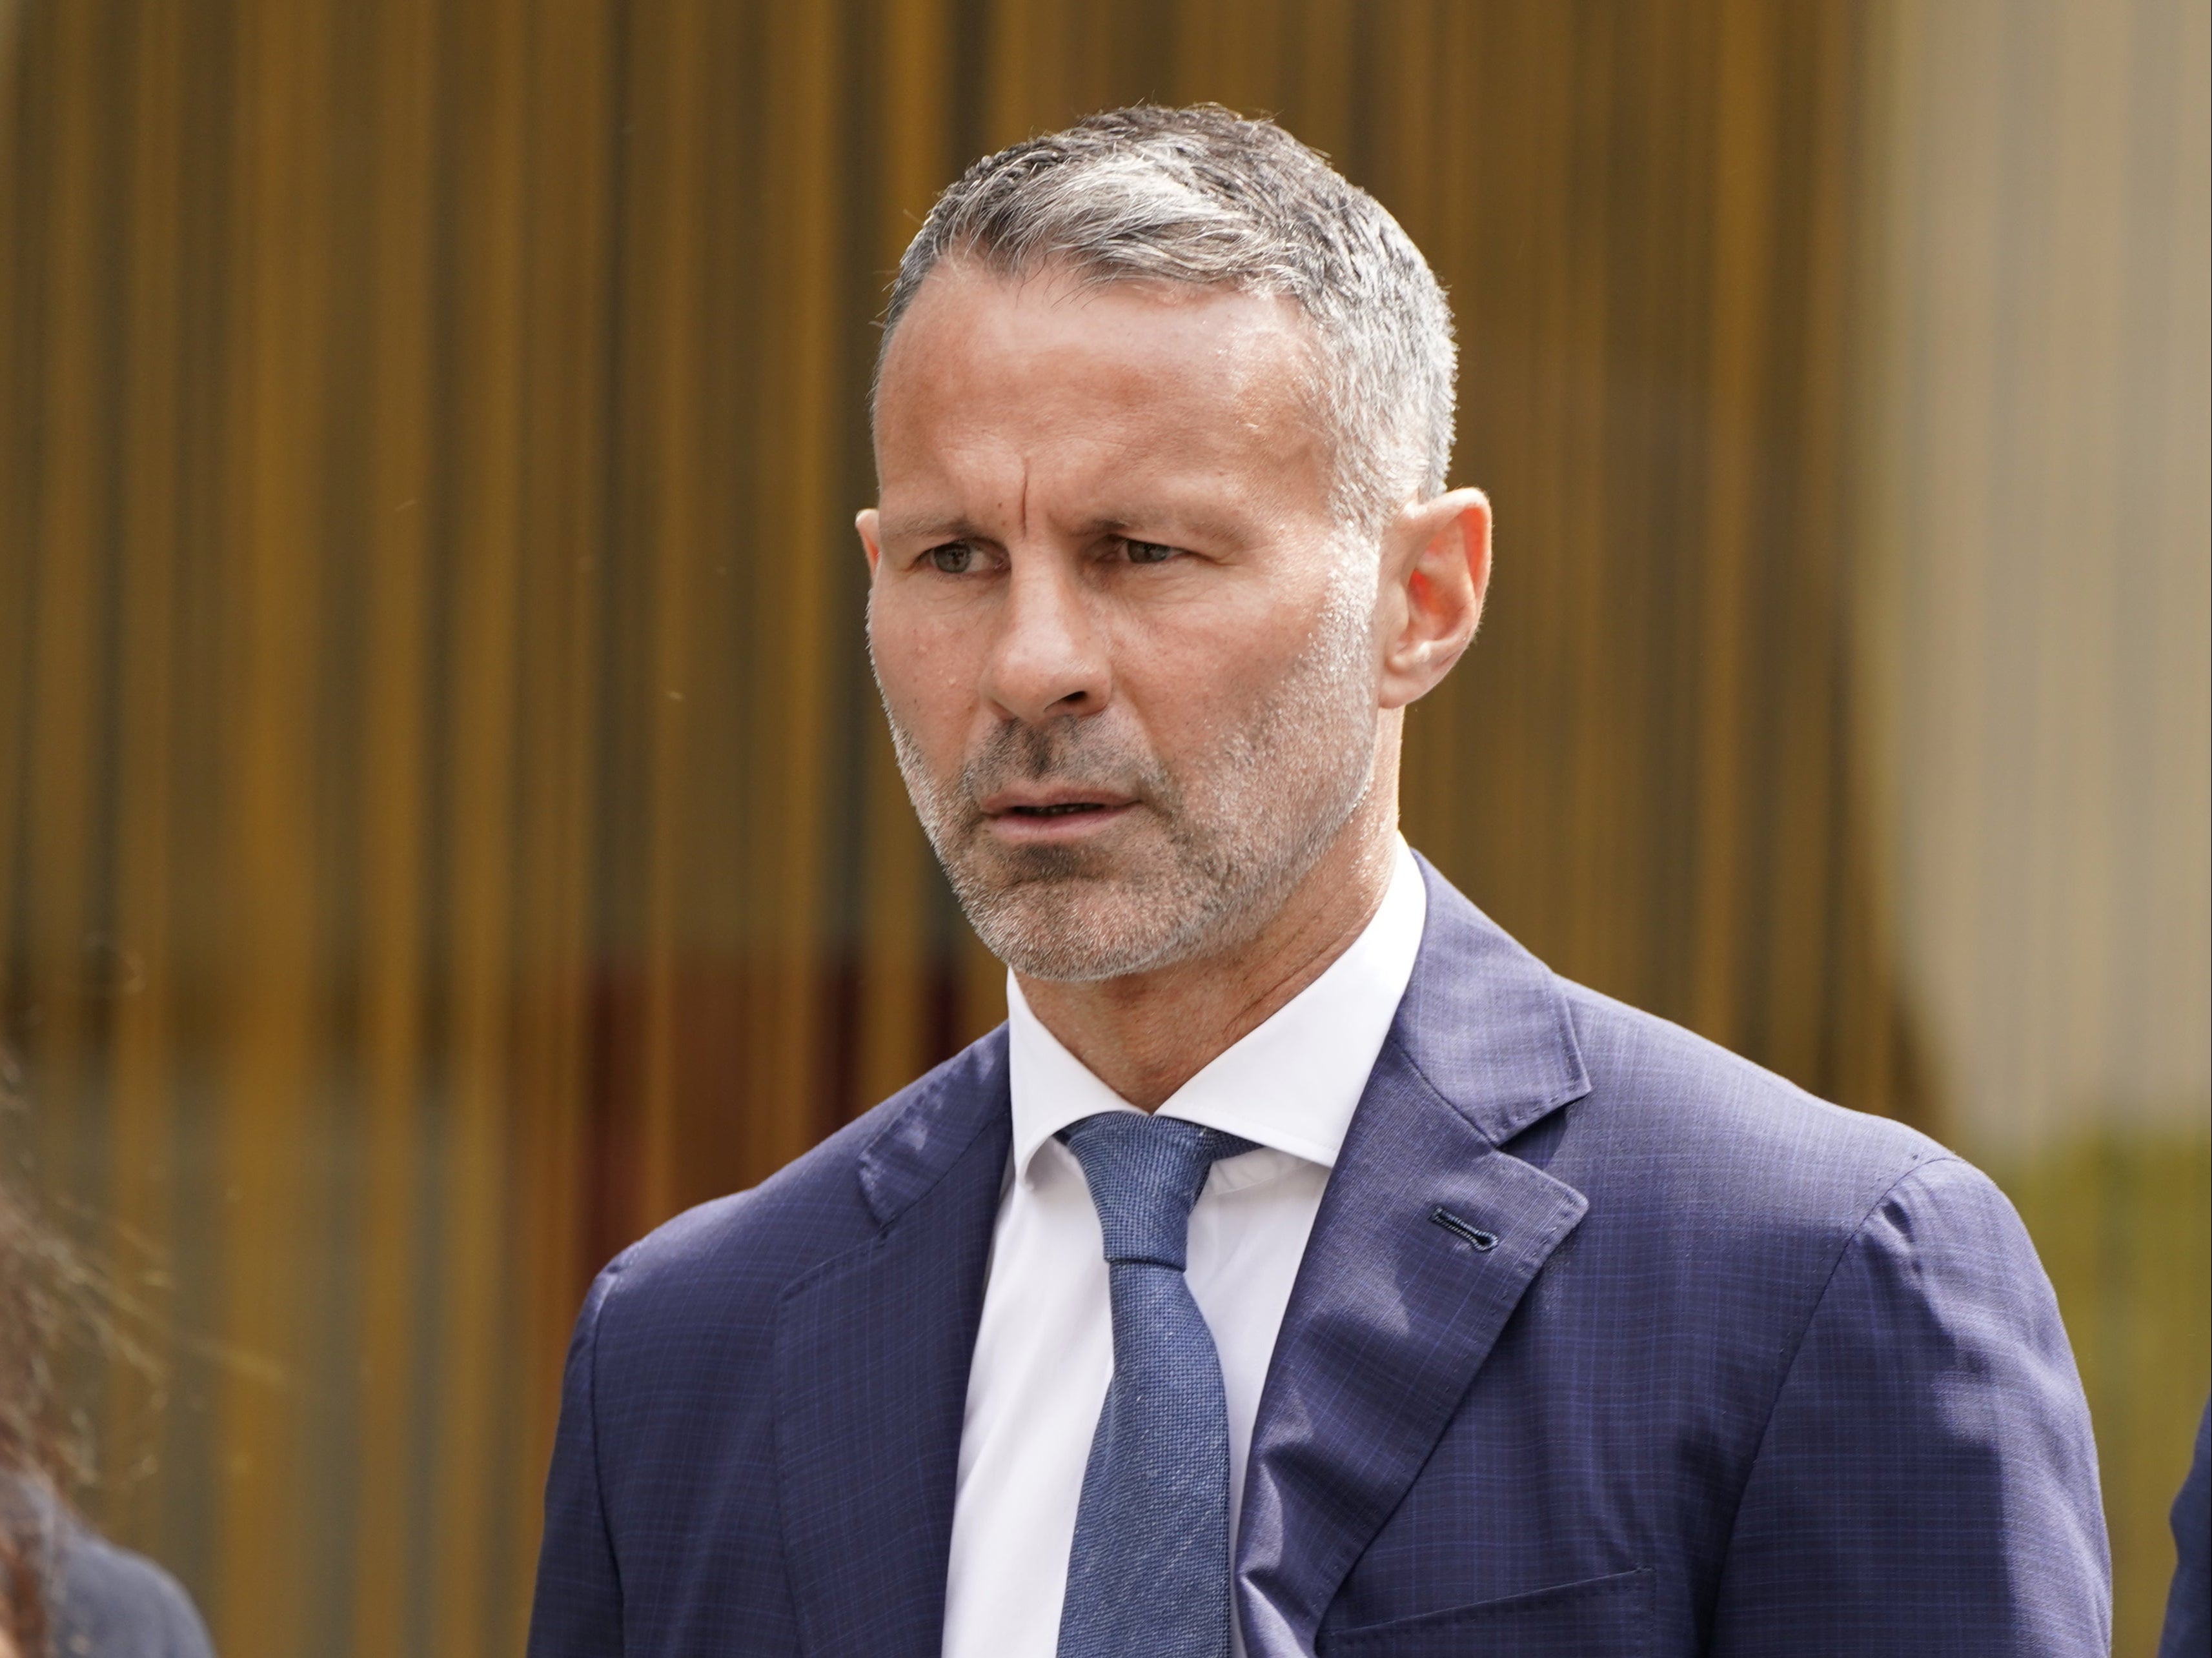 Former Manchester United footballer Ryan Giggs arrives at Manchester Crown Court where he is charged with assaulting two women and controlling or coercive behaviour